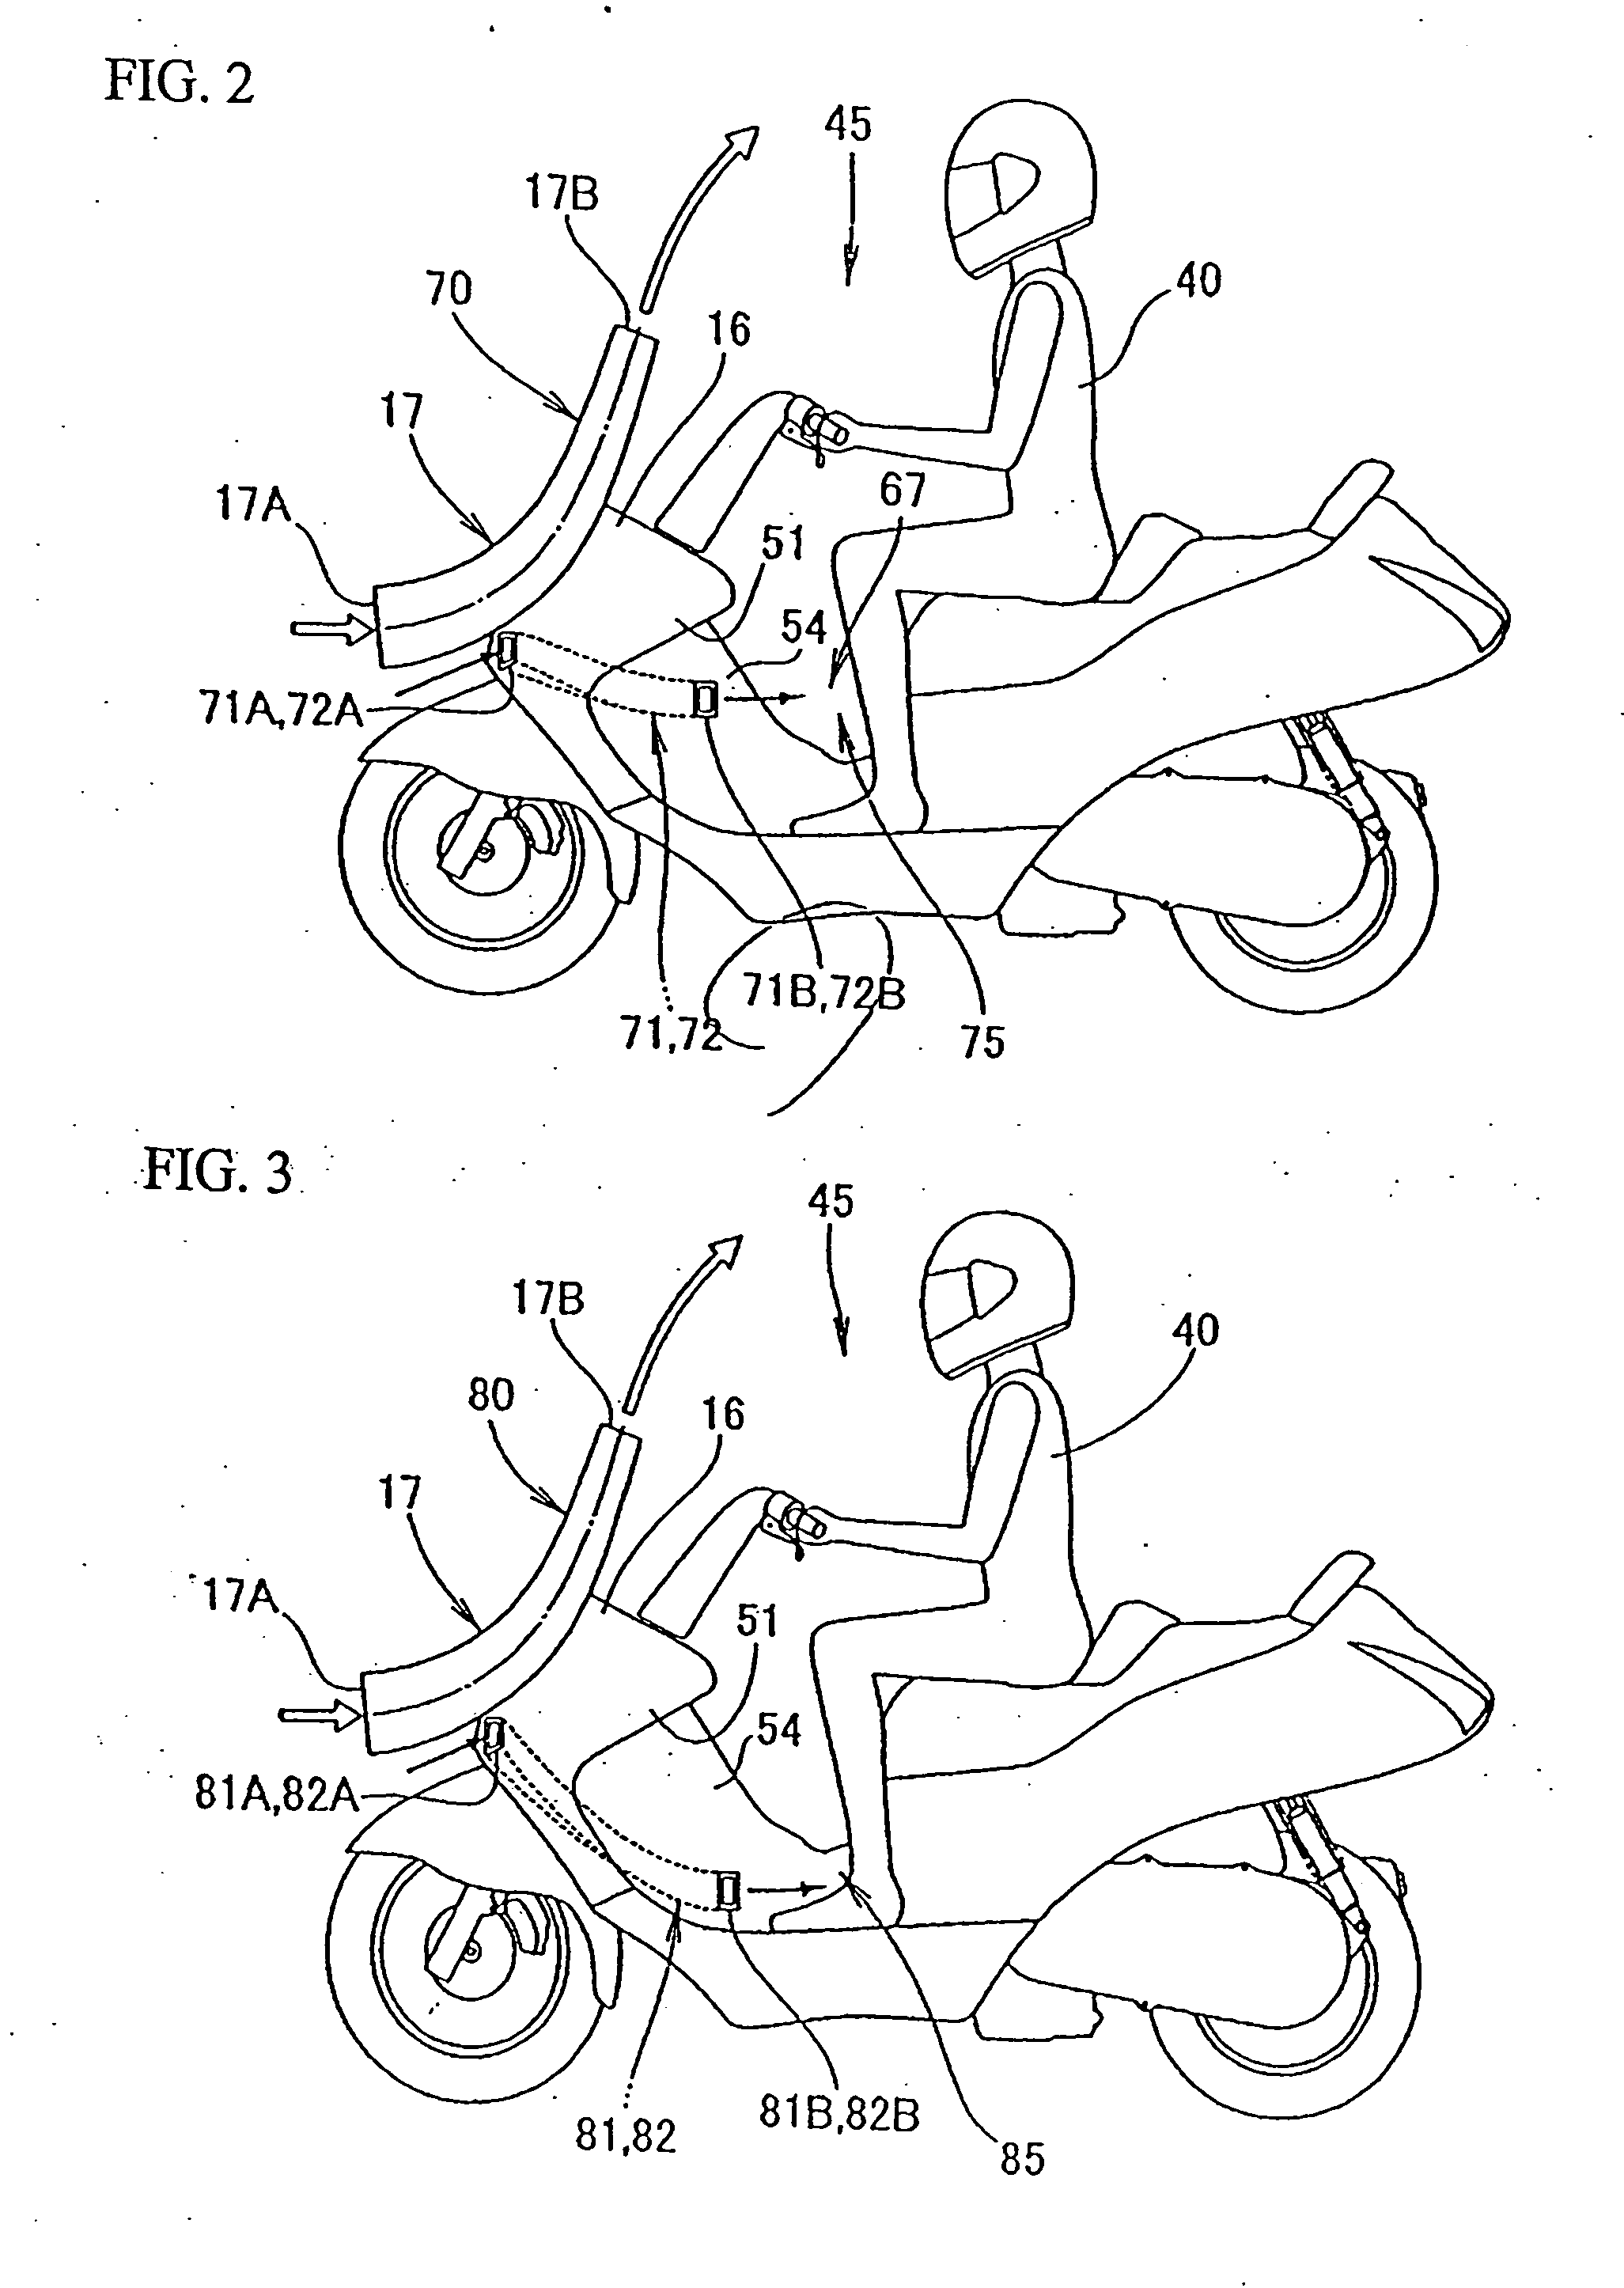 Windshield system for a saddle-type vehicle